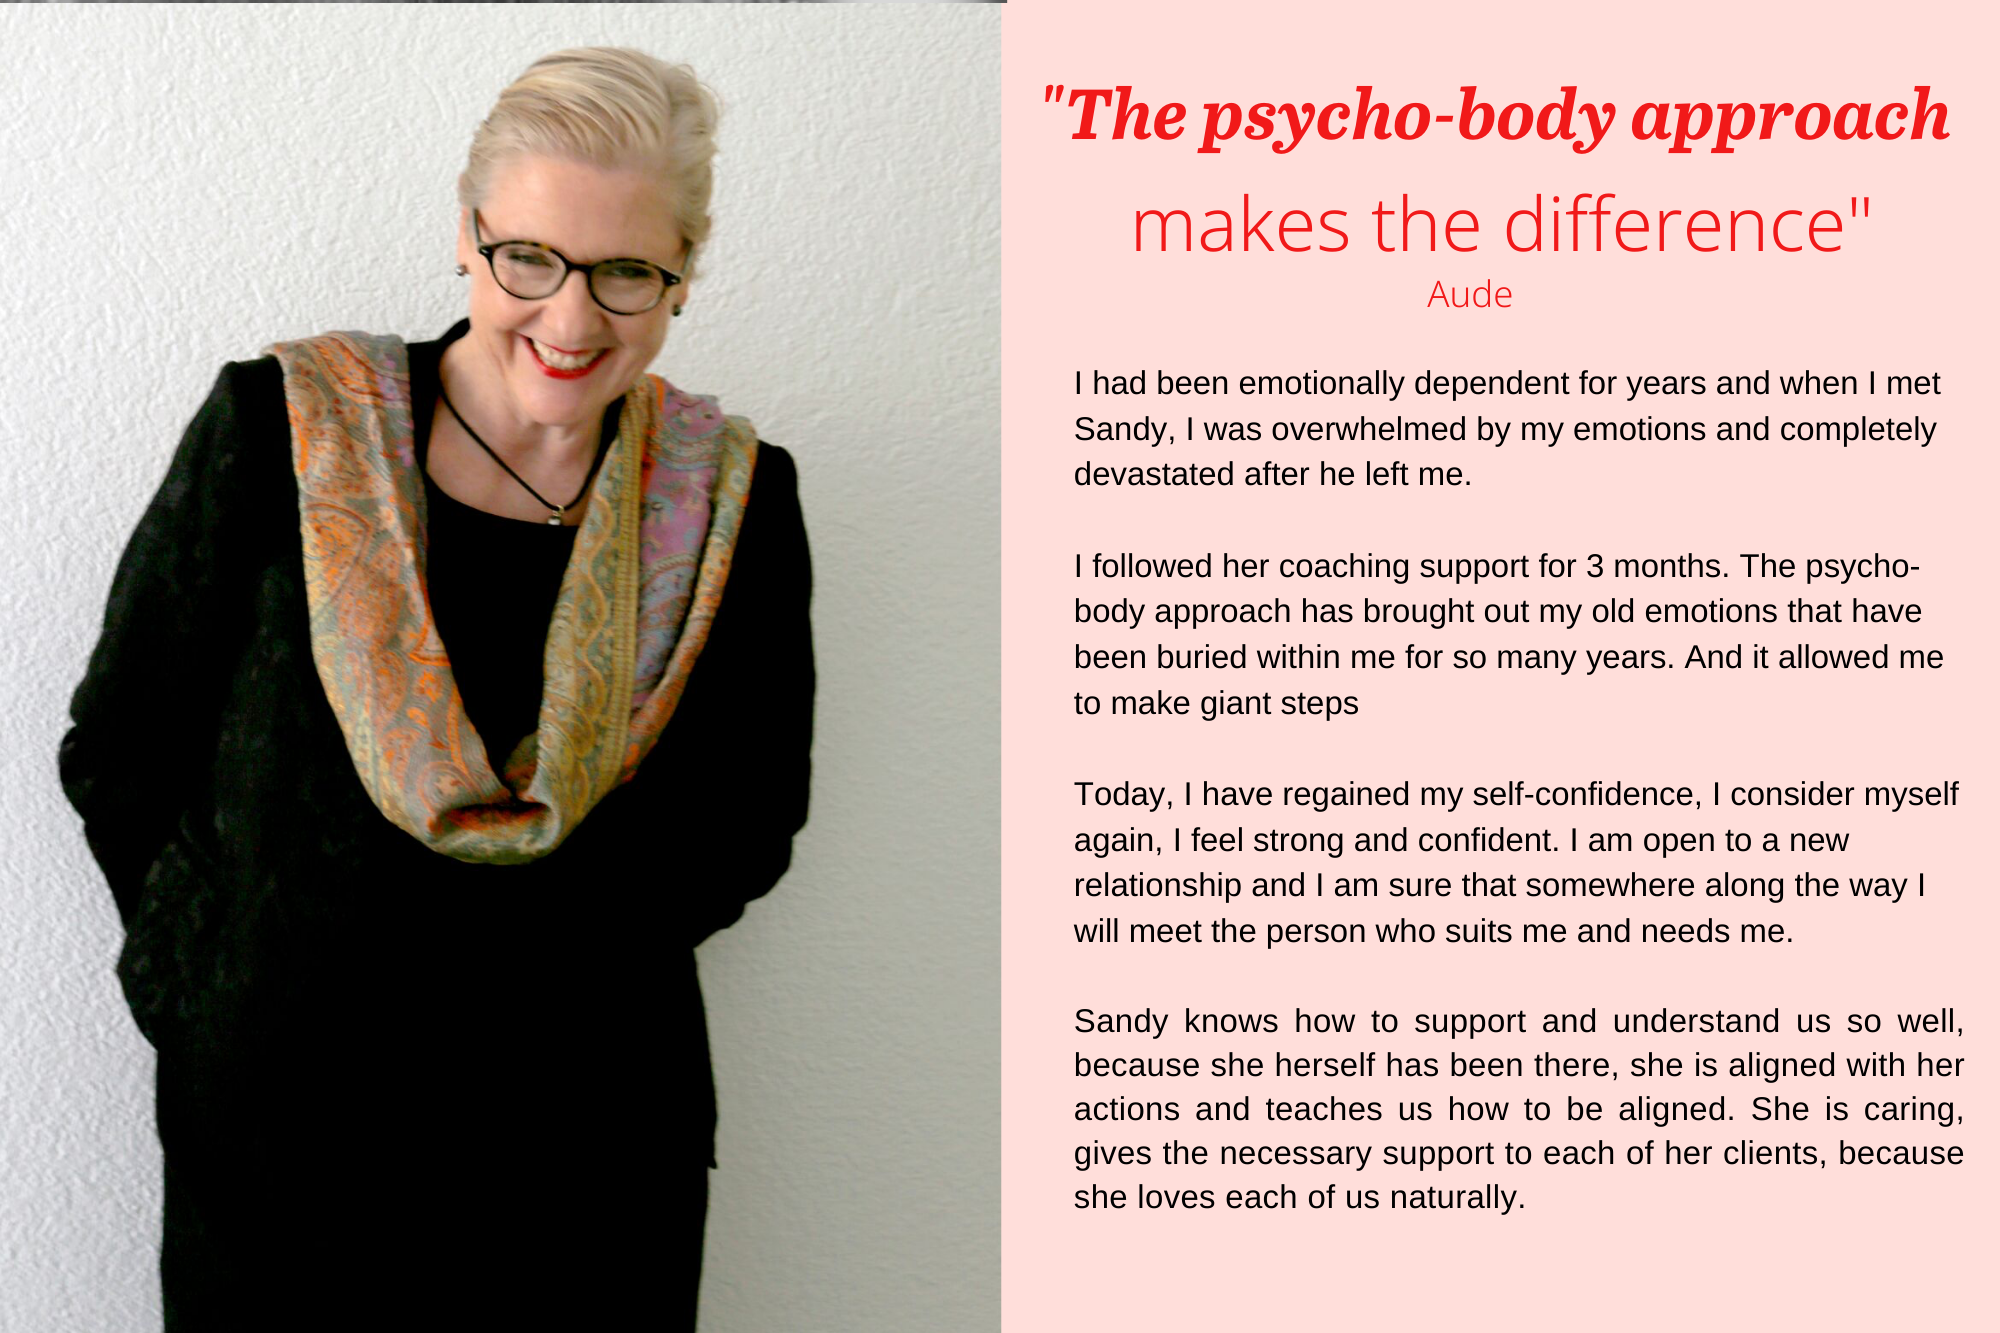 EN_Testimonials_lovecoach_The psycho-body approach makes the difference